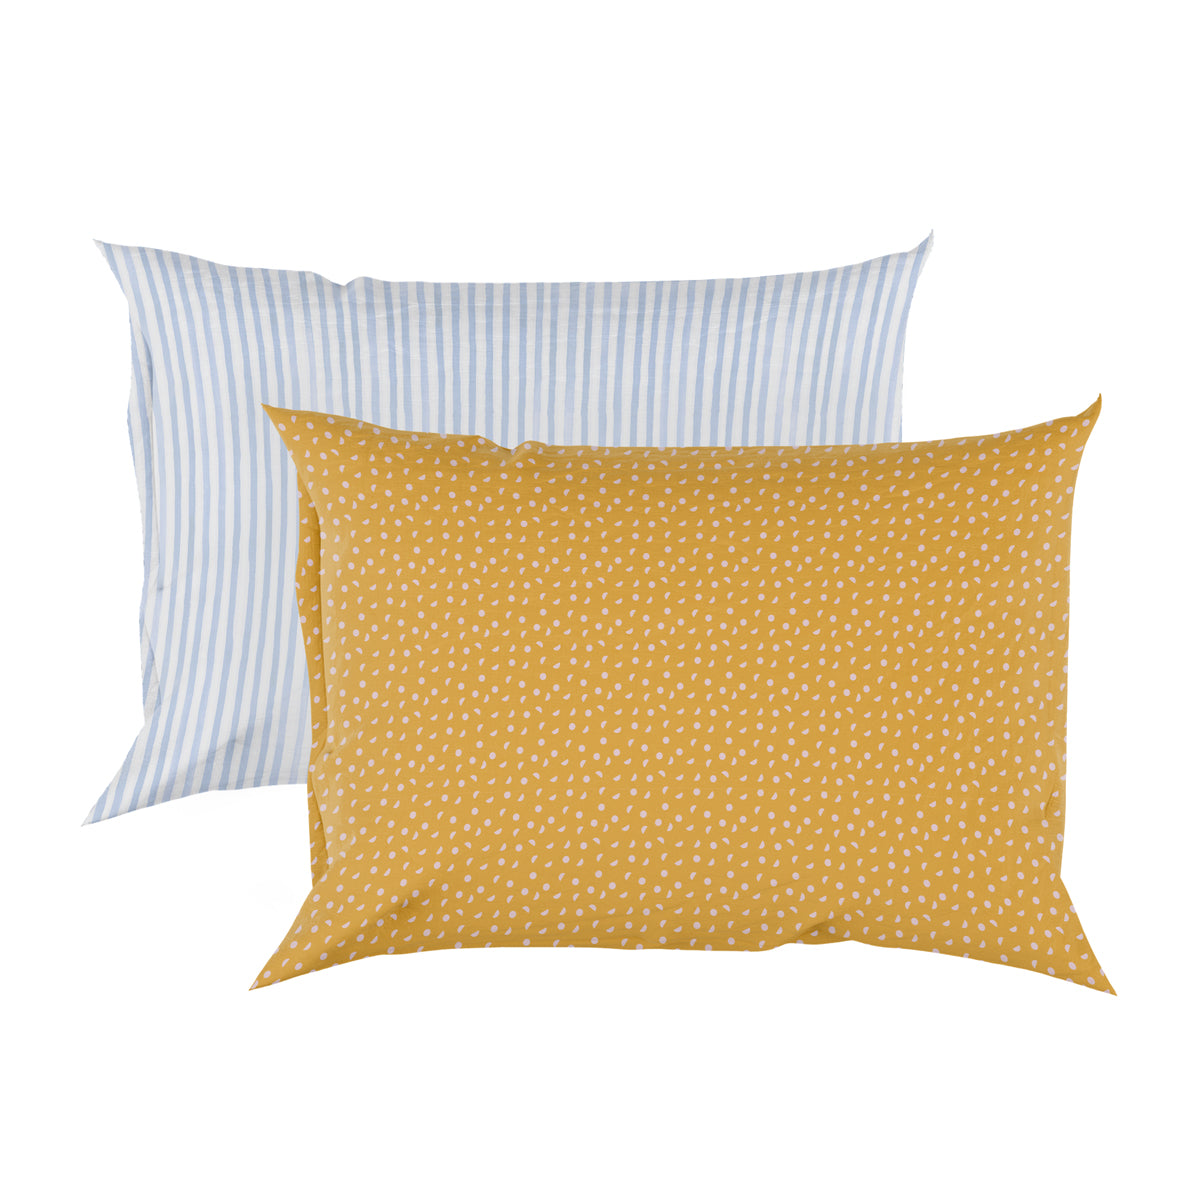 A set of two queen silk pillowcases - Simple Stripe and Luna Dot